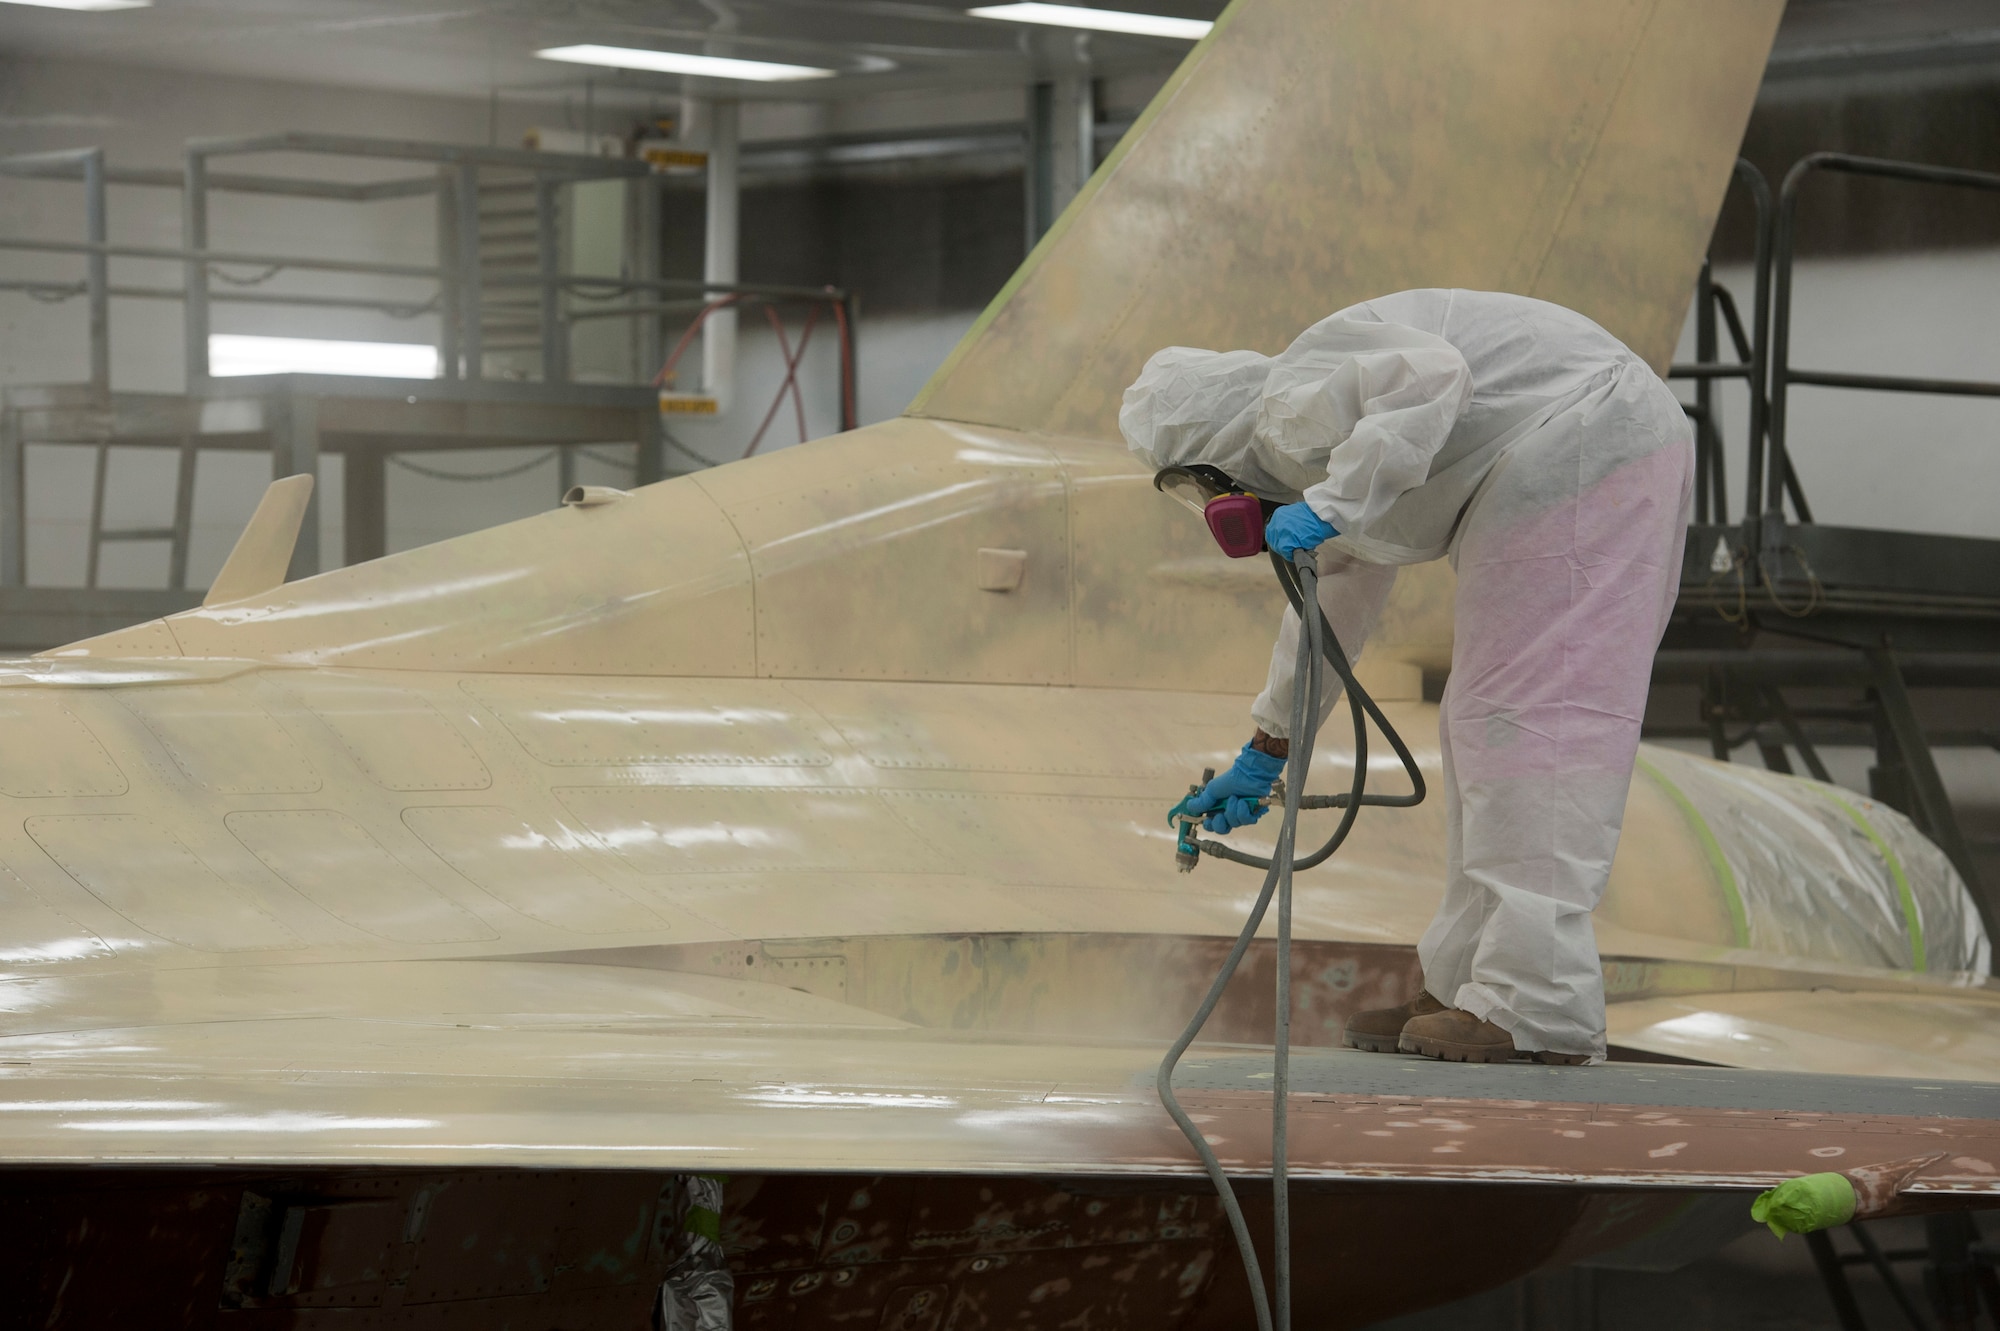 J.J. Ruddell, 57th Maintenance Group corrosion shop aircraft painter, sprays primer on an F-16 Fighting Falcon inside a temperature-controlled building on Nellis Air Force Base, Nev., Sept. 9, 2015. The corrosion shop will do approximately 12 to 15 full paint jobs per year. (U.S. Air Force photo by Airman 1st Class Mikaley Kline)